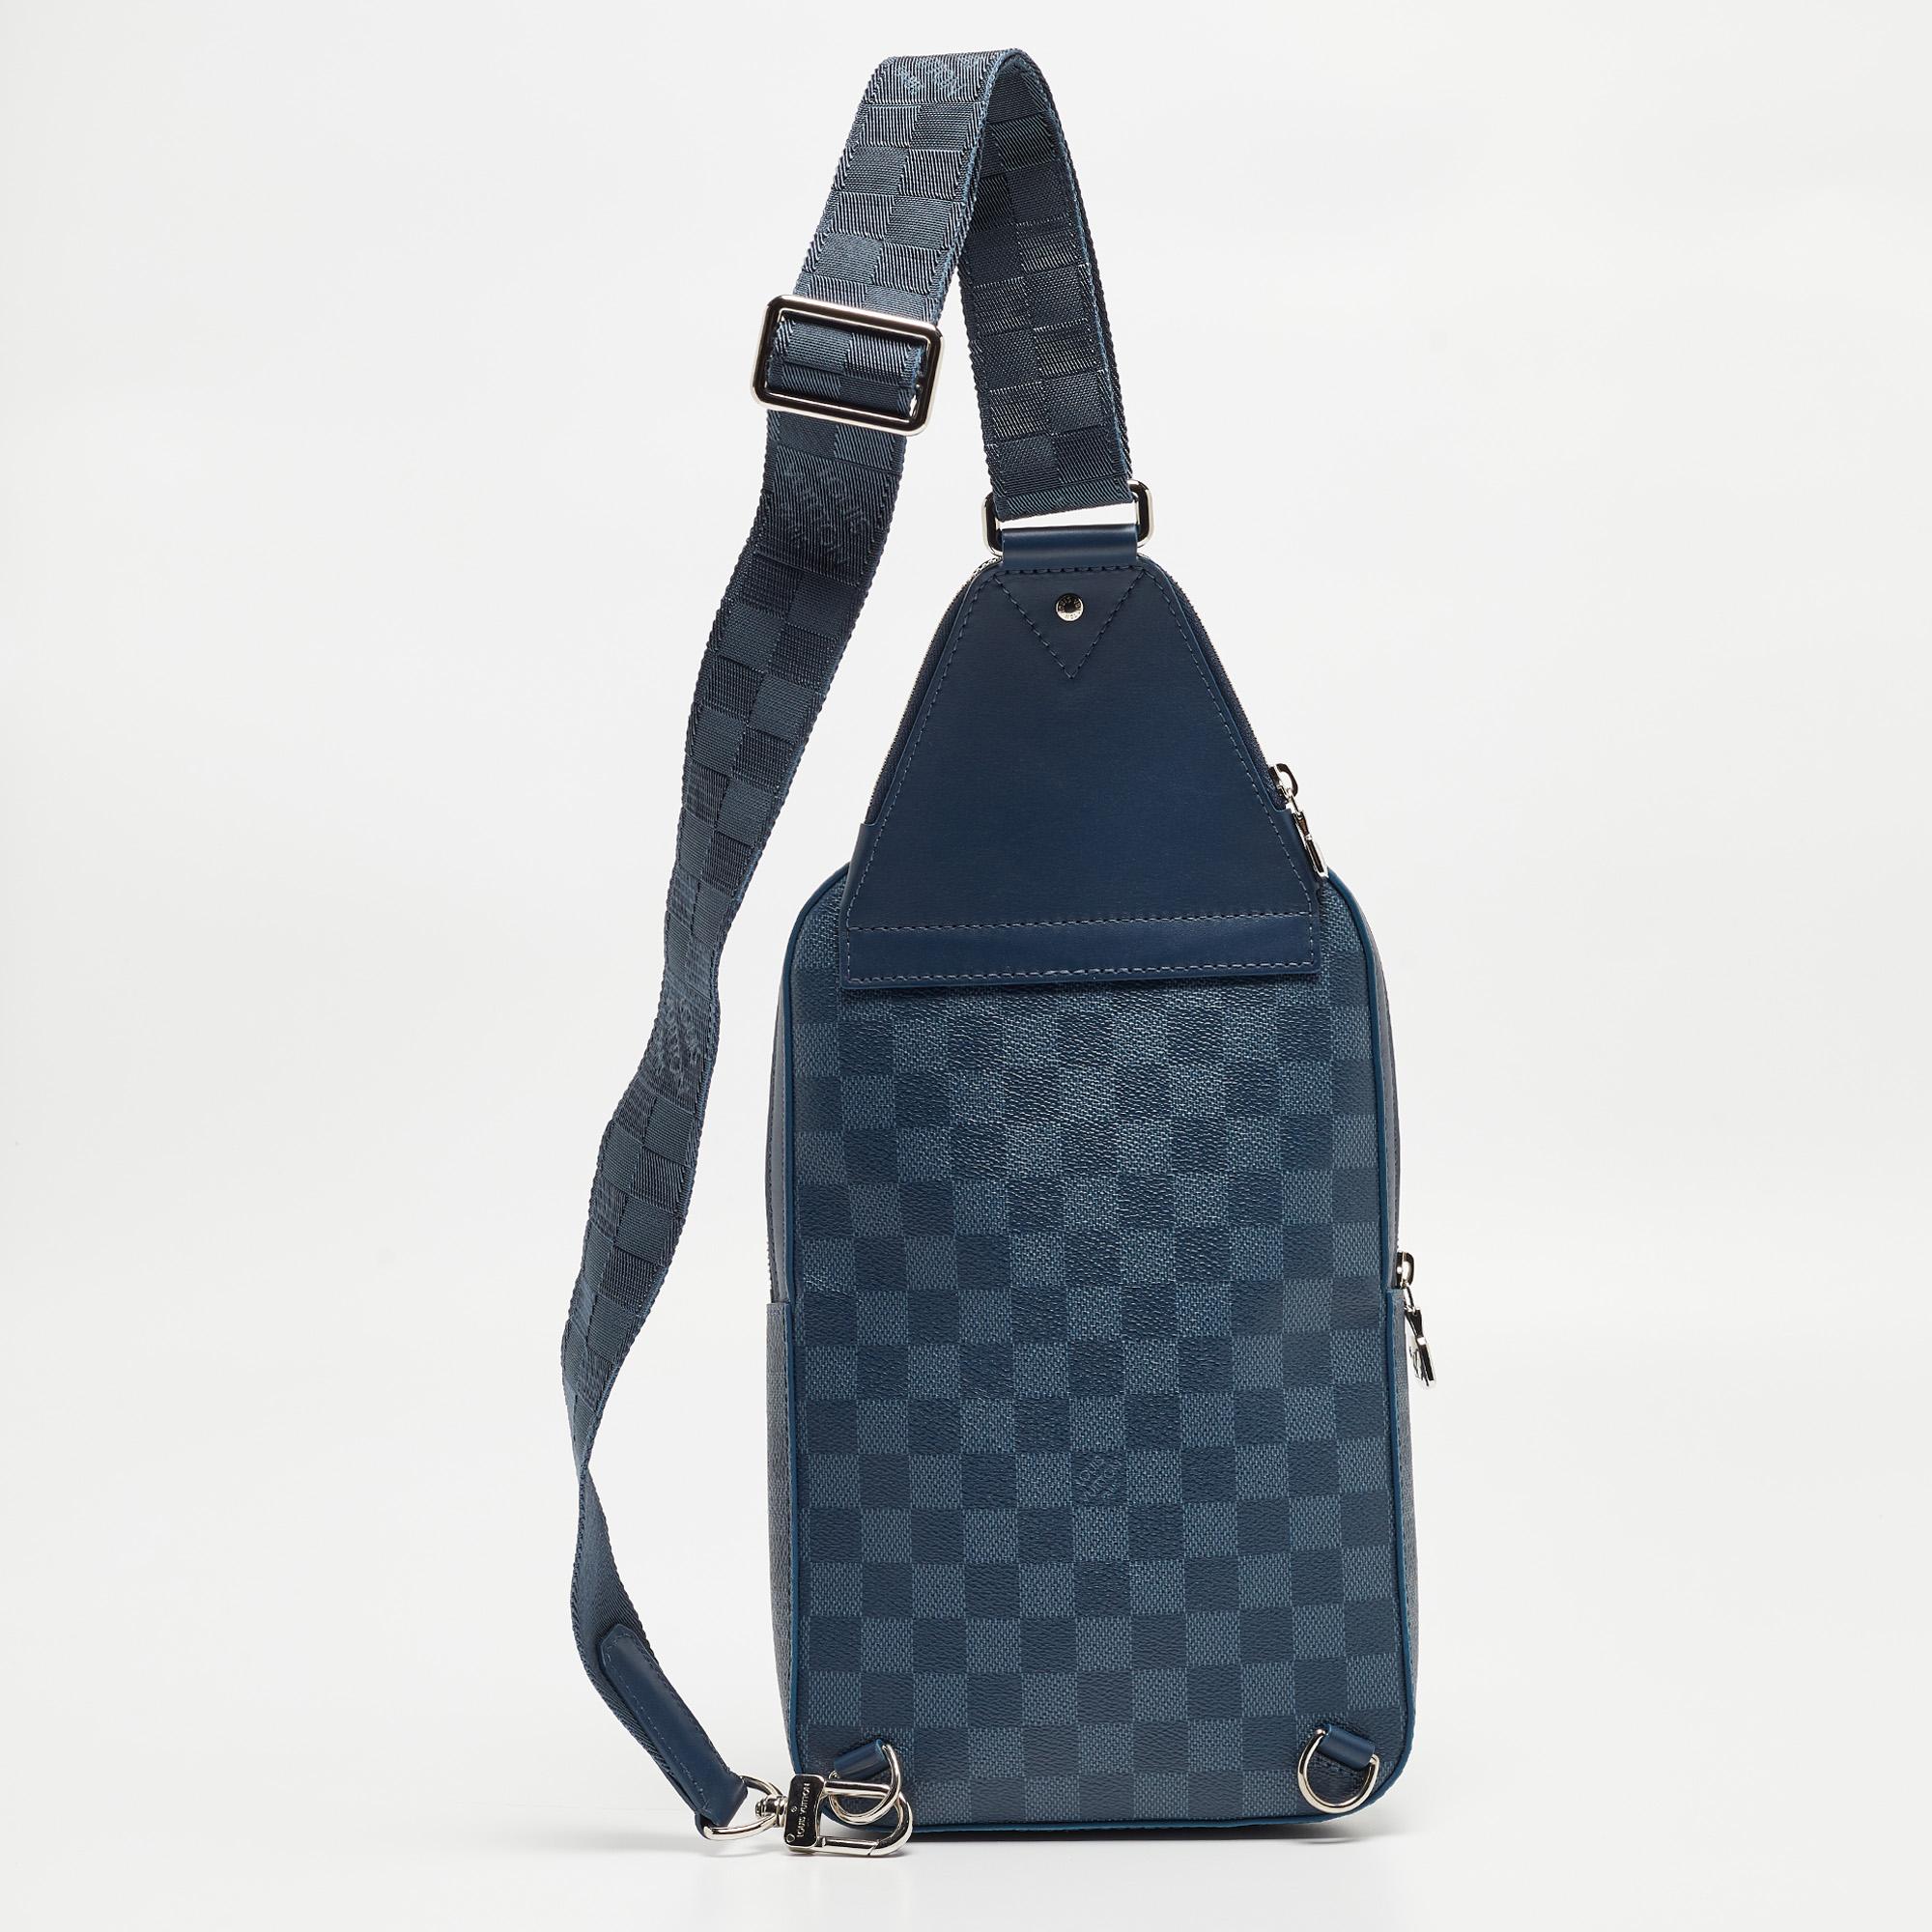 This Louis Vuitton bag will come in handy for daily use or as a style statement. It is crafted from Damier Cobalt with Blue Sapphire Damier Infini canvas and designed with a spacious interior secured by a zipper. A single crossbody strap and a front